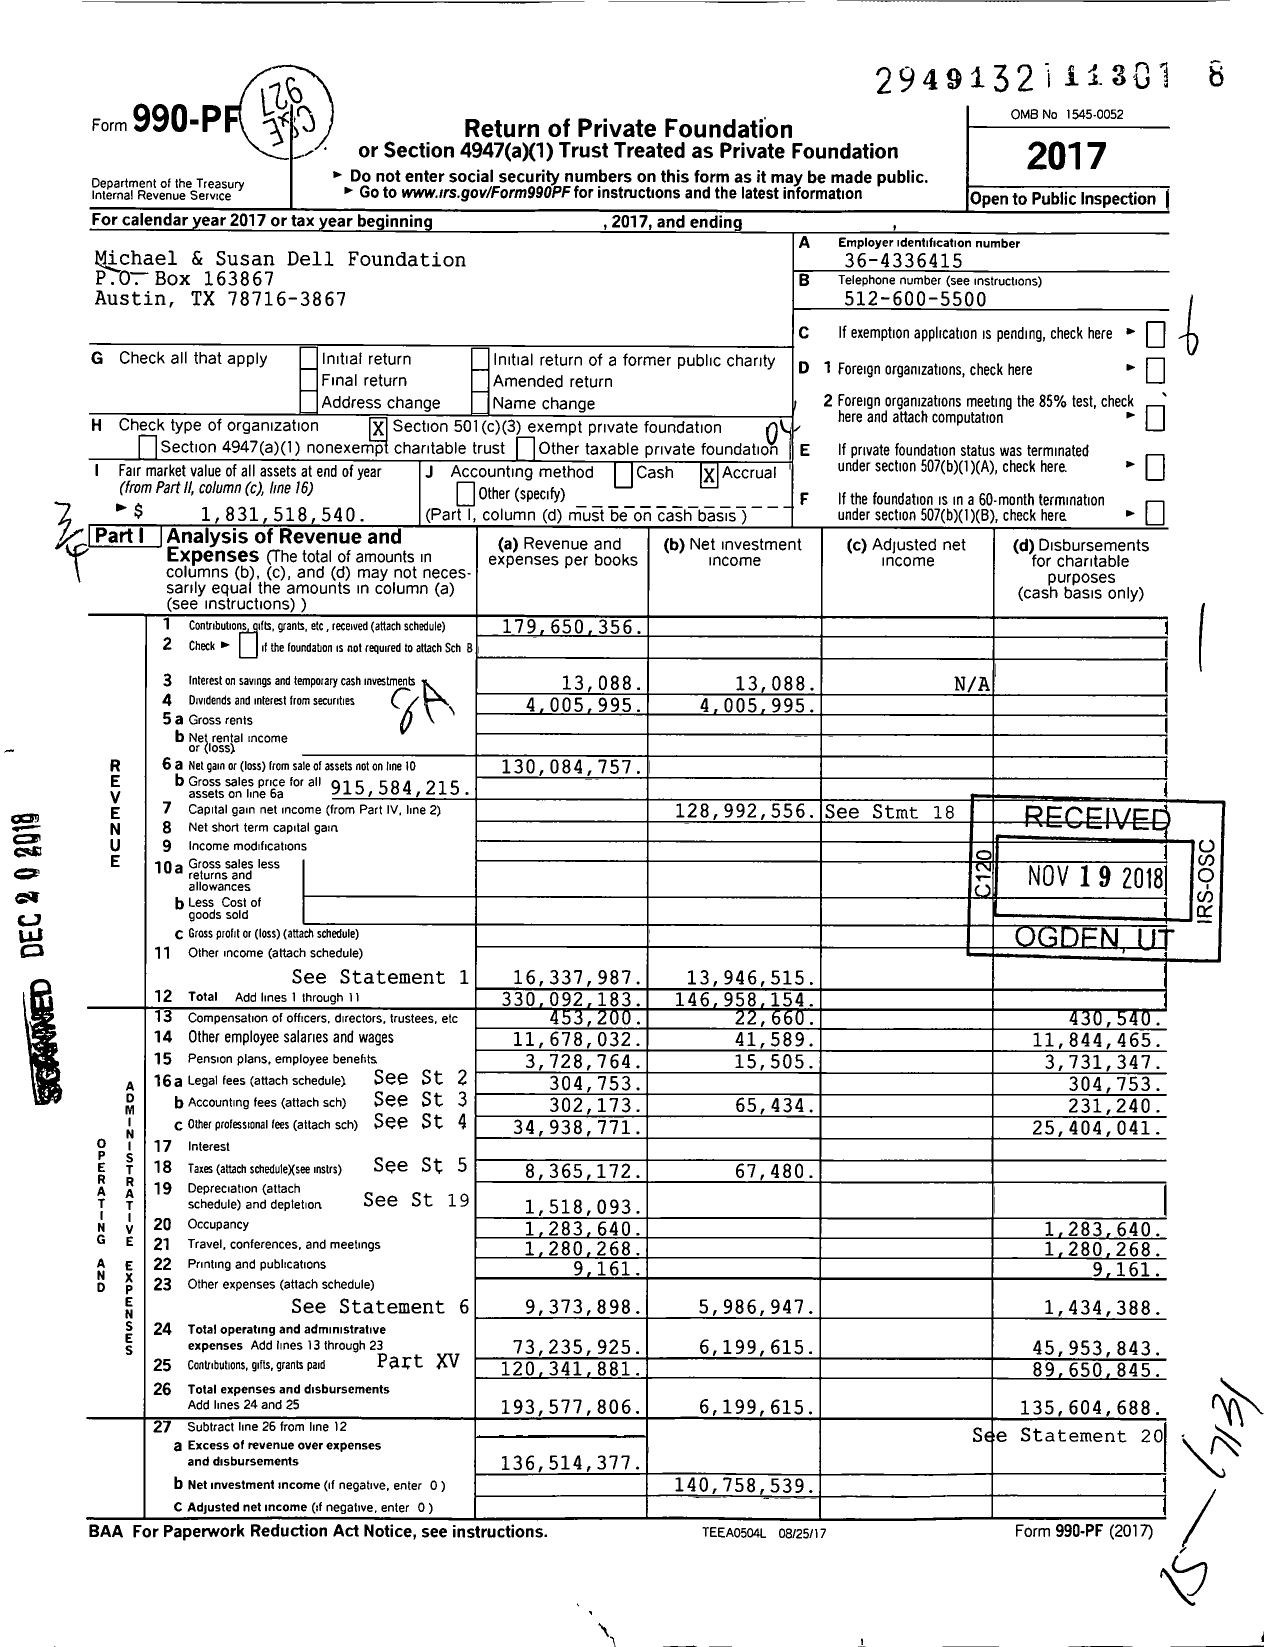 Image of first page of 2017 Form 990PF for Michael and Susan Dell Foundation (MSDF)